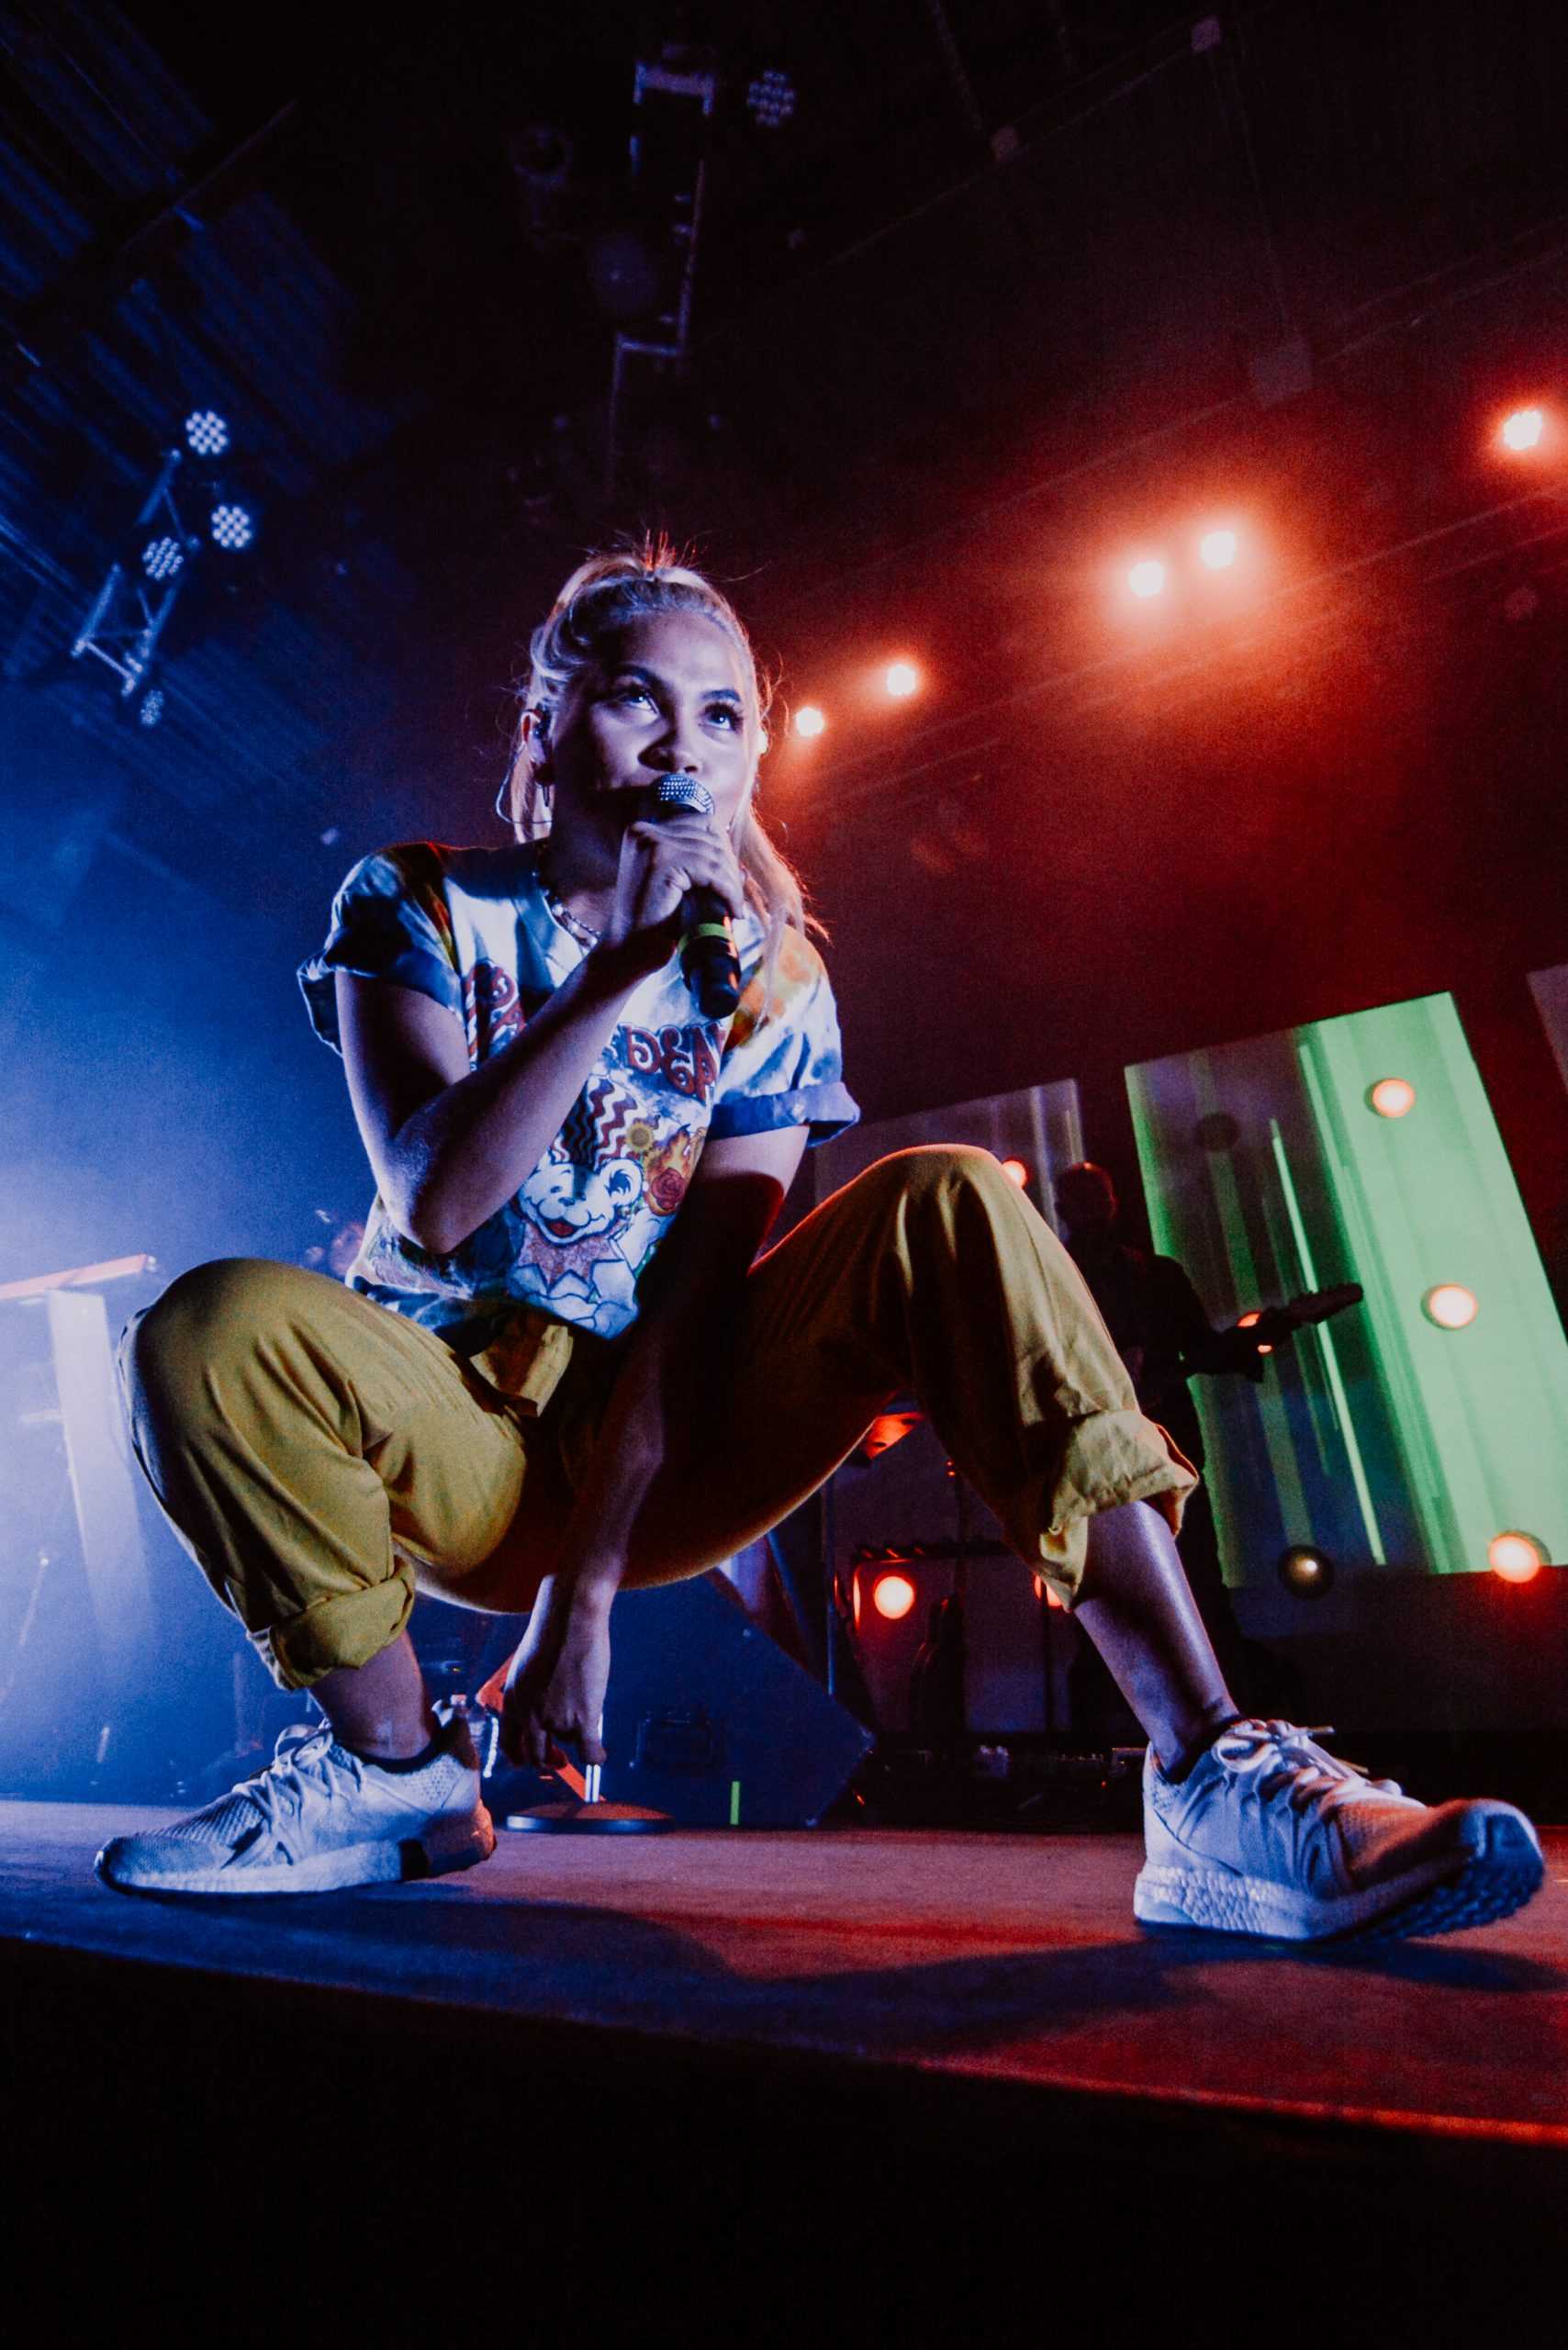 Hayley+Kiyoko+wows+fans+at+Summit+Music+Hall+with+an+interactive+performance